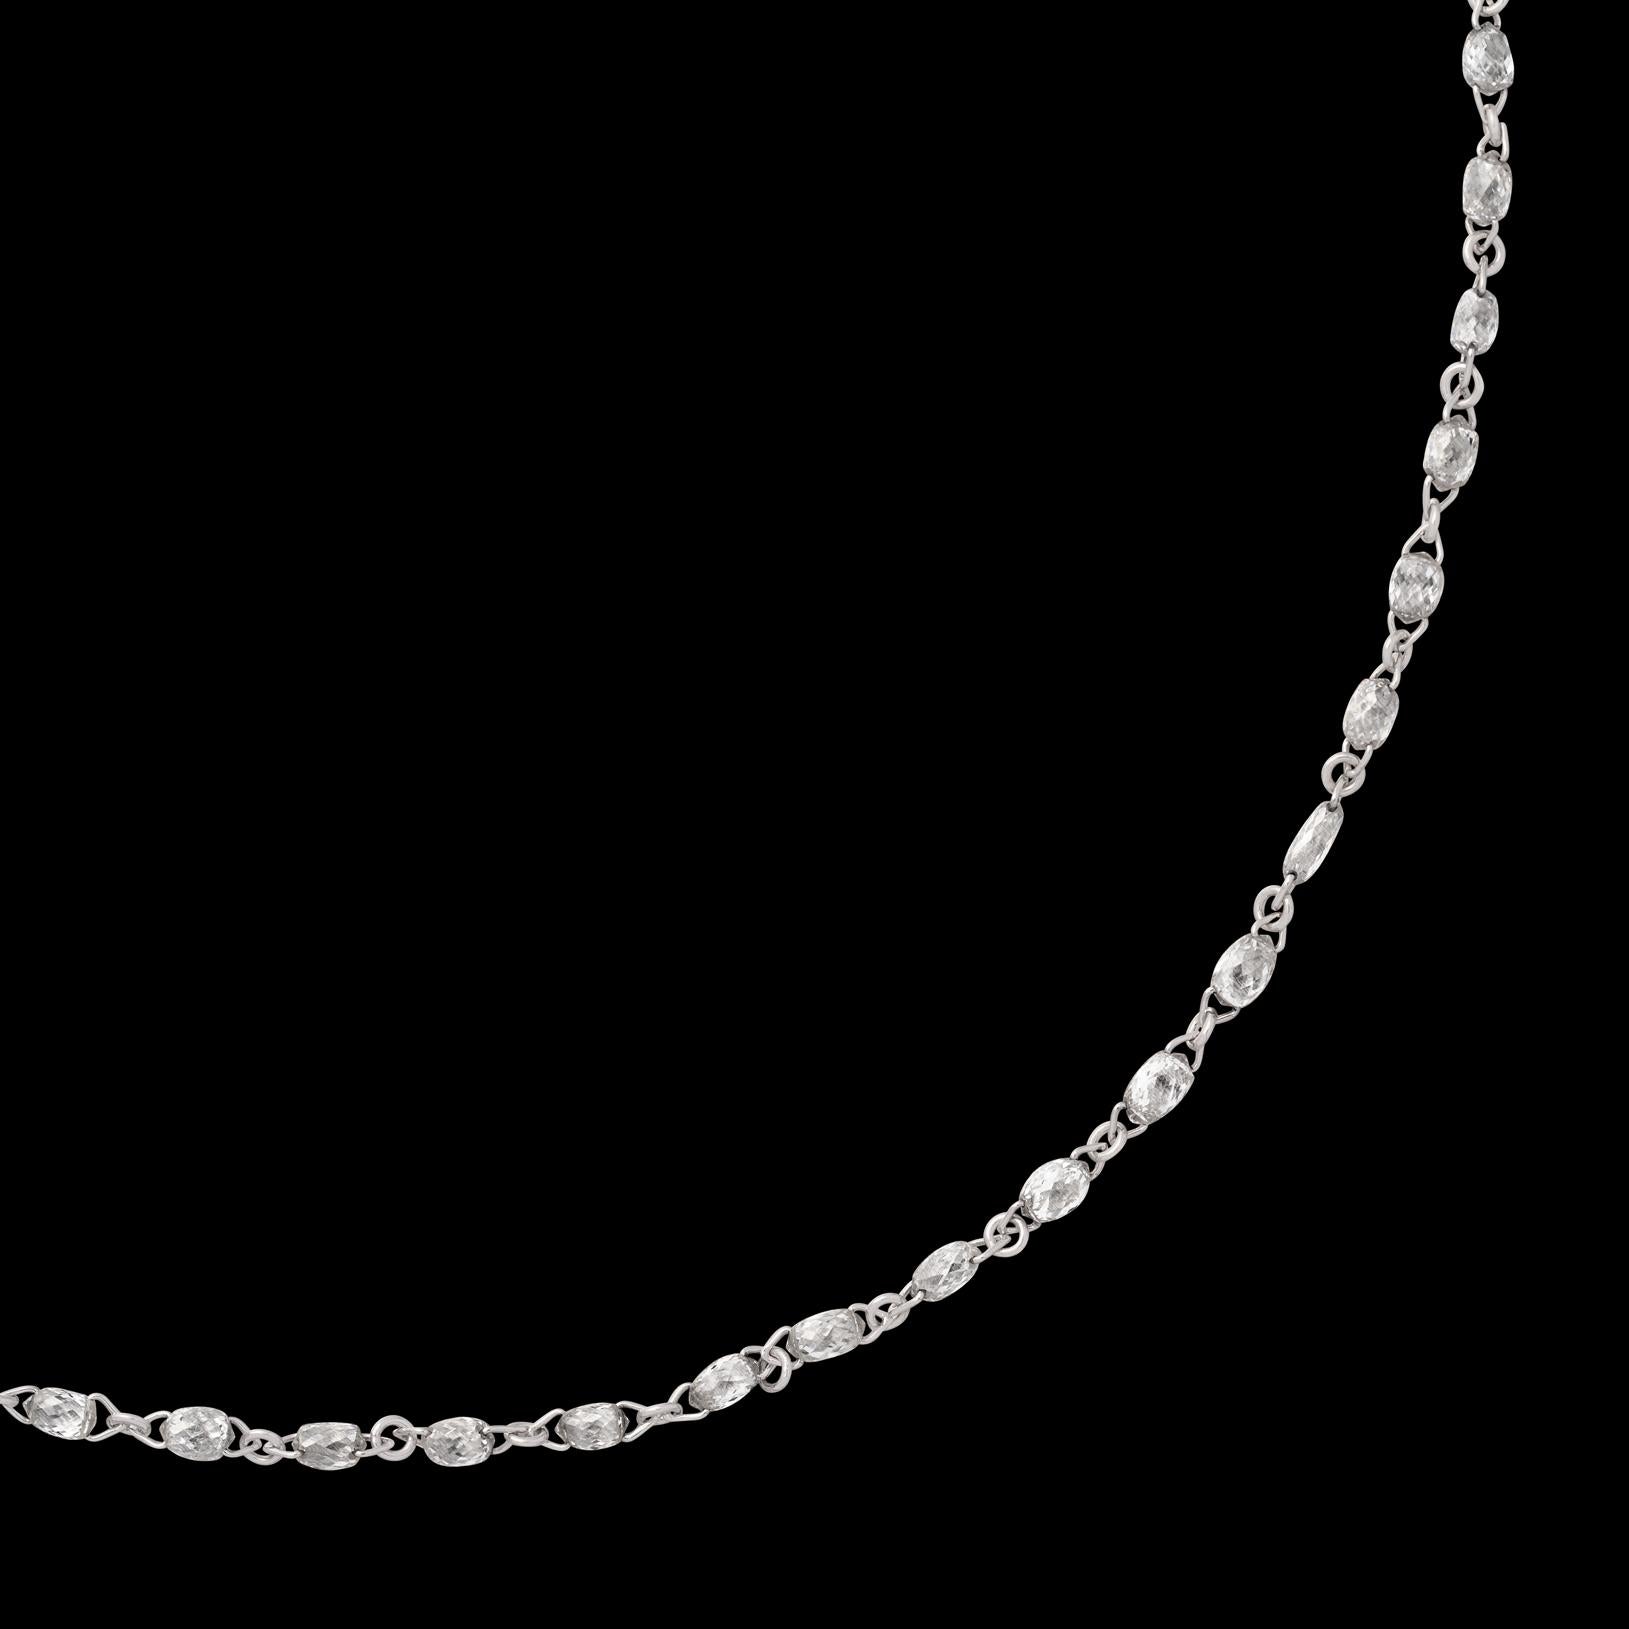 7.57 Carat Diamond Necklace in 18kt White Gold In New Condition For Sale In San Francisco, CA